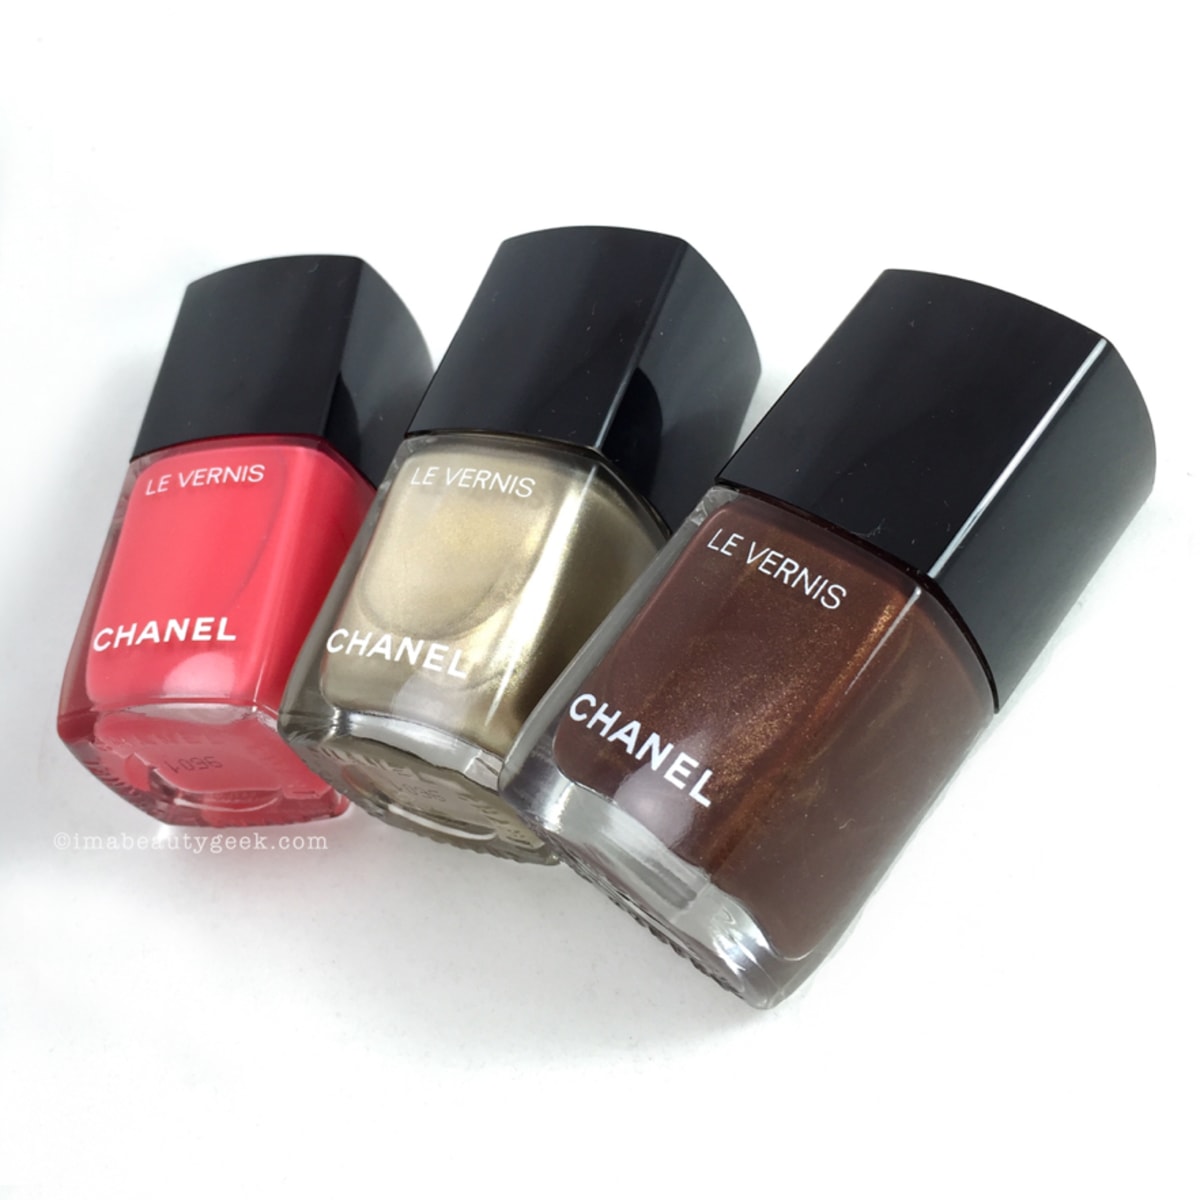 CHANEL SUMMER 2016 VERNIS SWATCHES & REVIEW - Beautygeeks